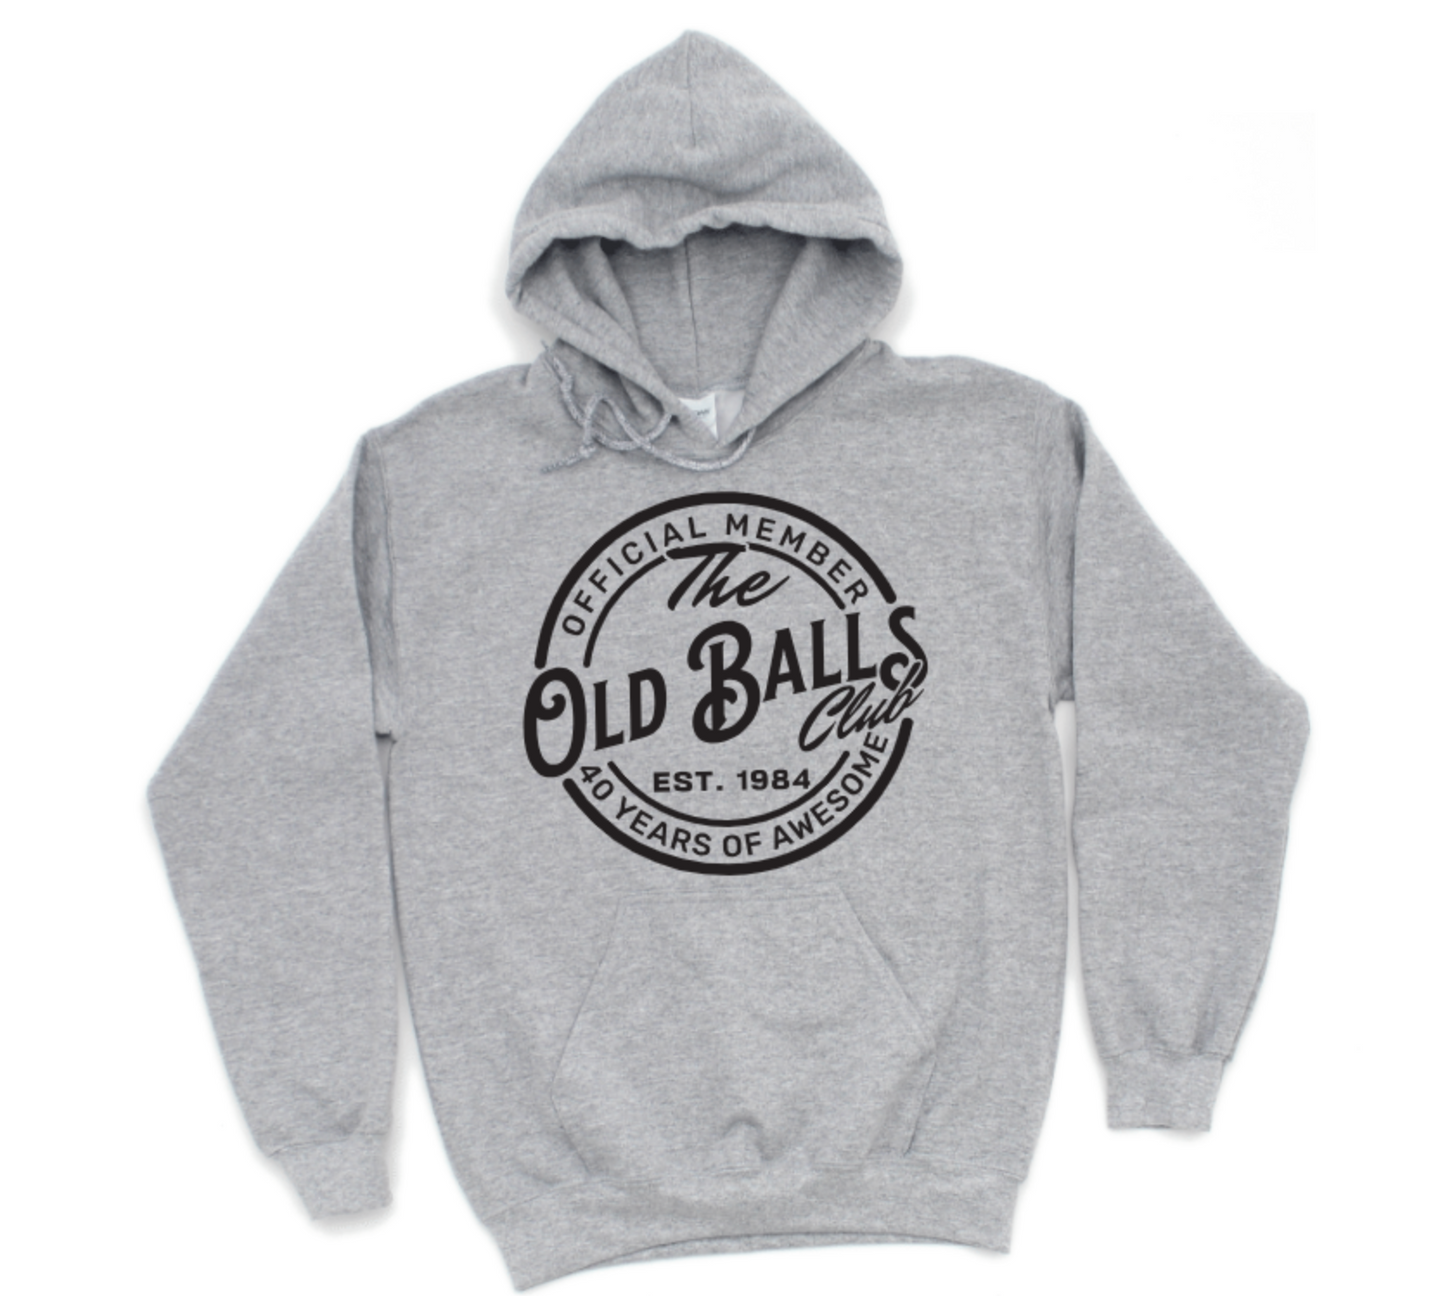 THE OLD BALLS CLUB OFFICIAL MEMBER (CHANGE THE YEAR)